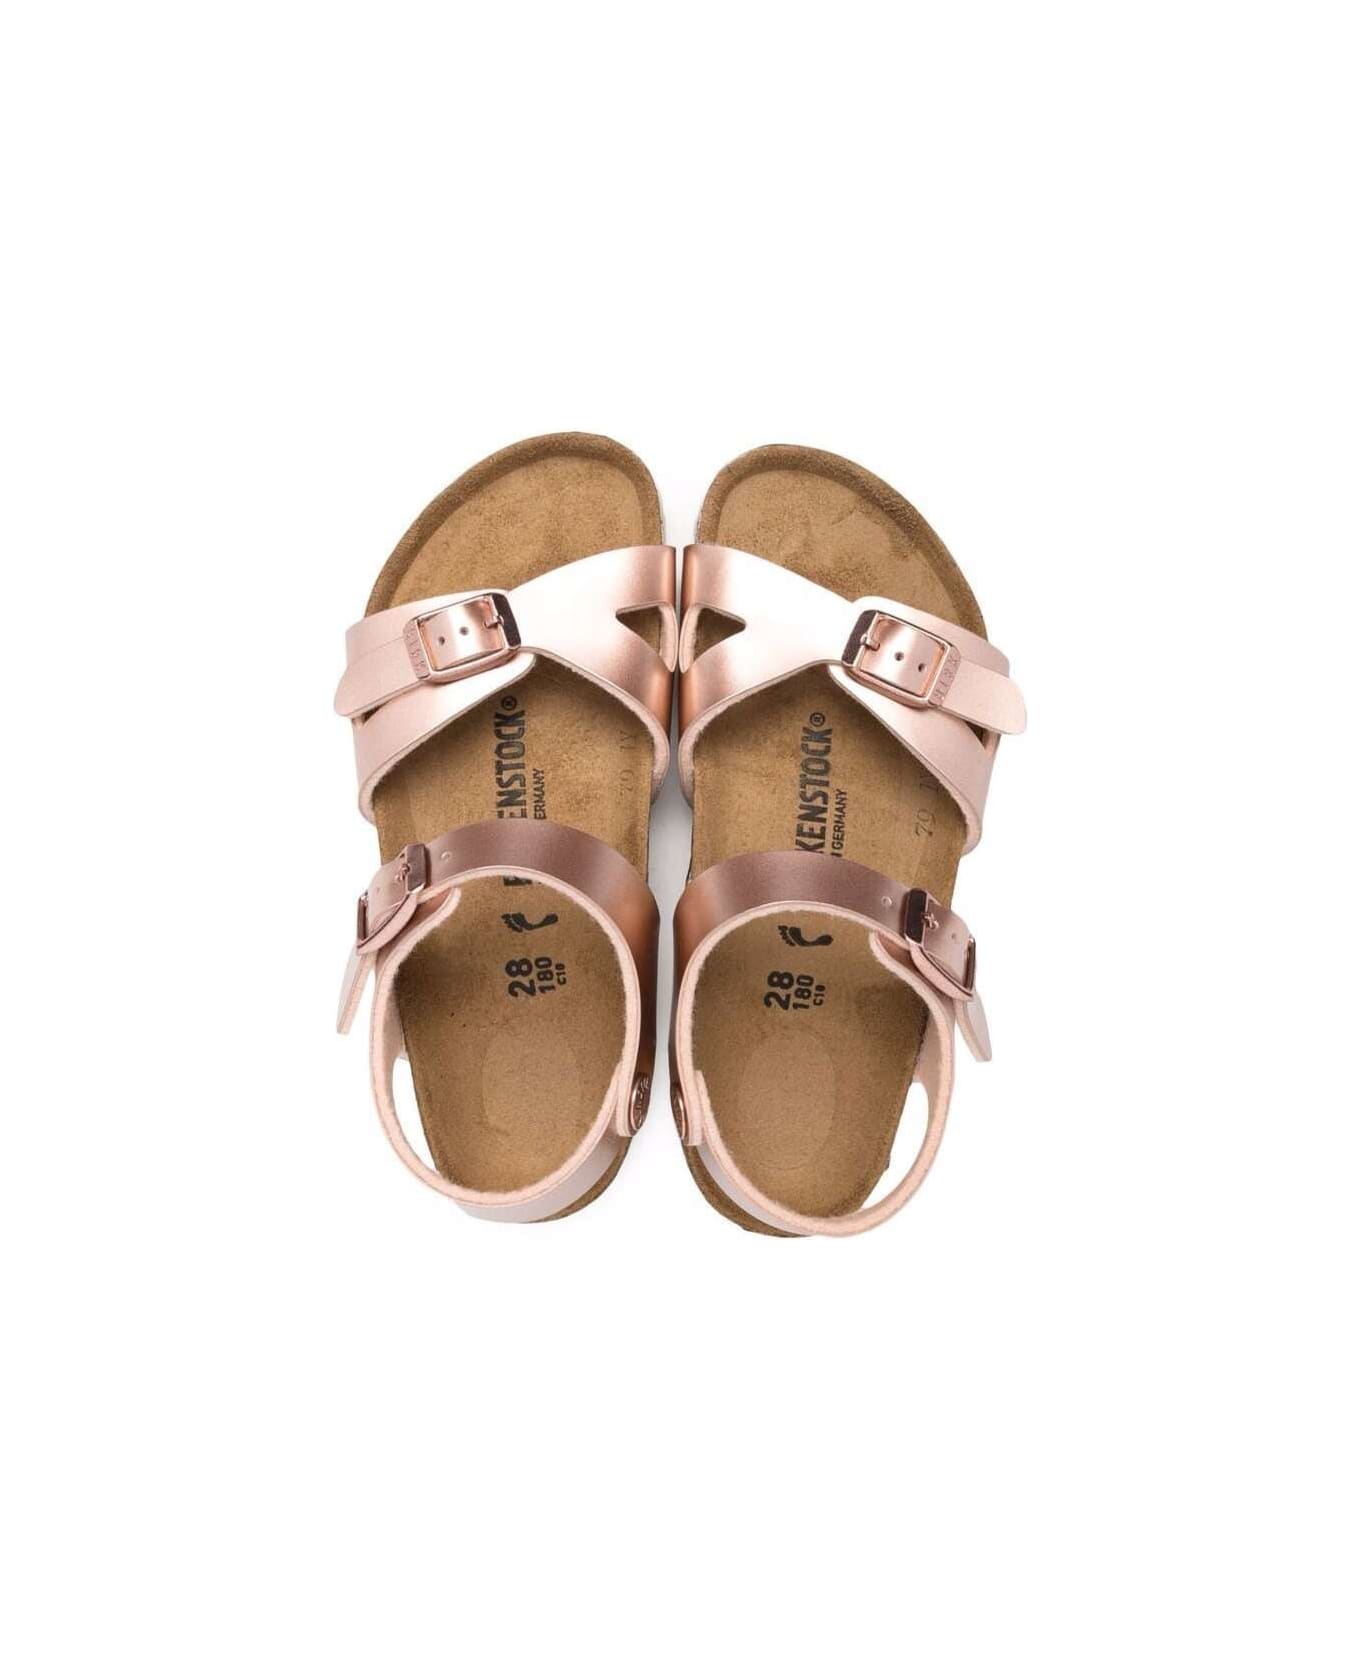 Birkenstock Kids Girl's Rio Electric Pink Leather Sandals - Pink